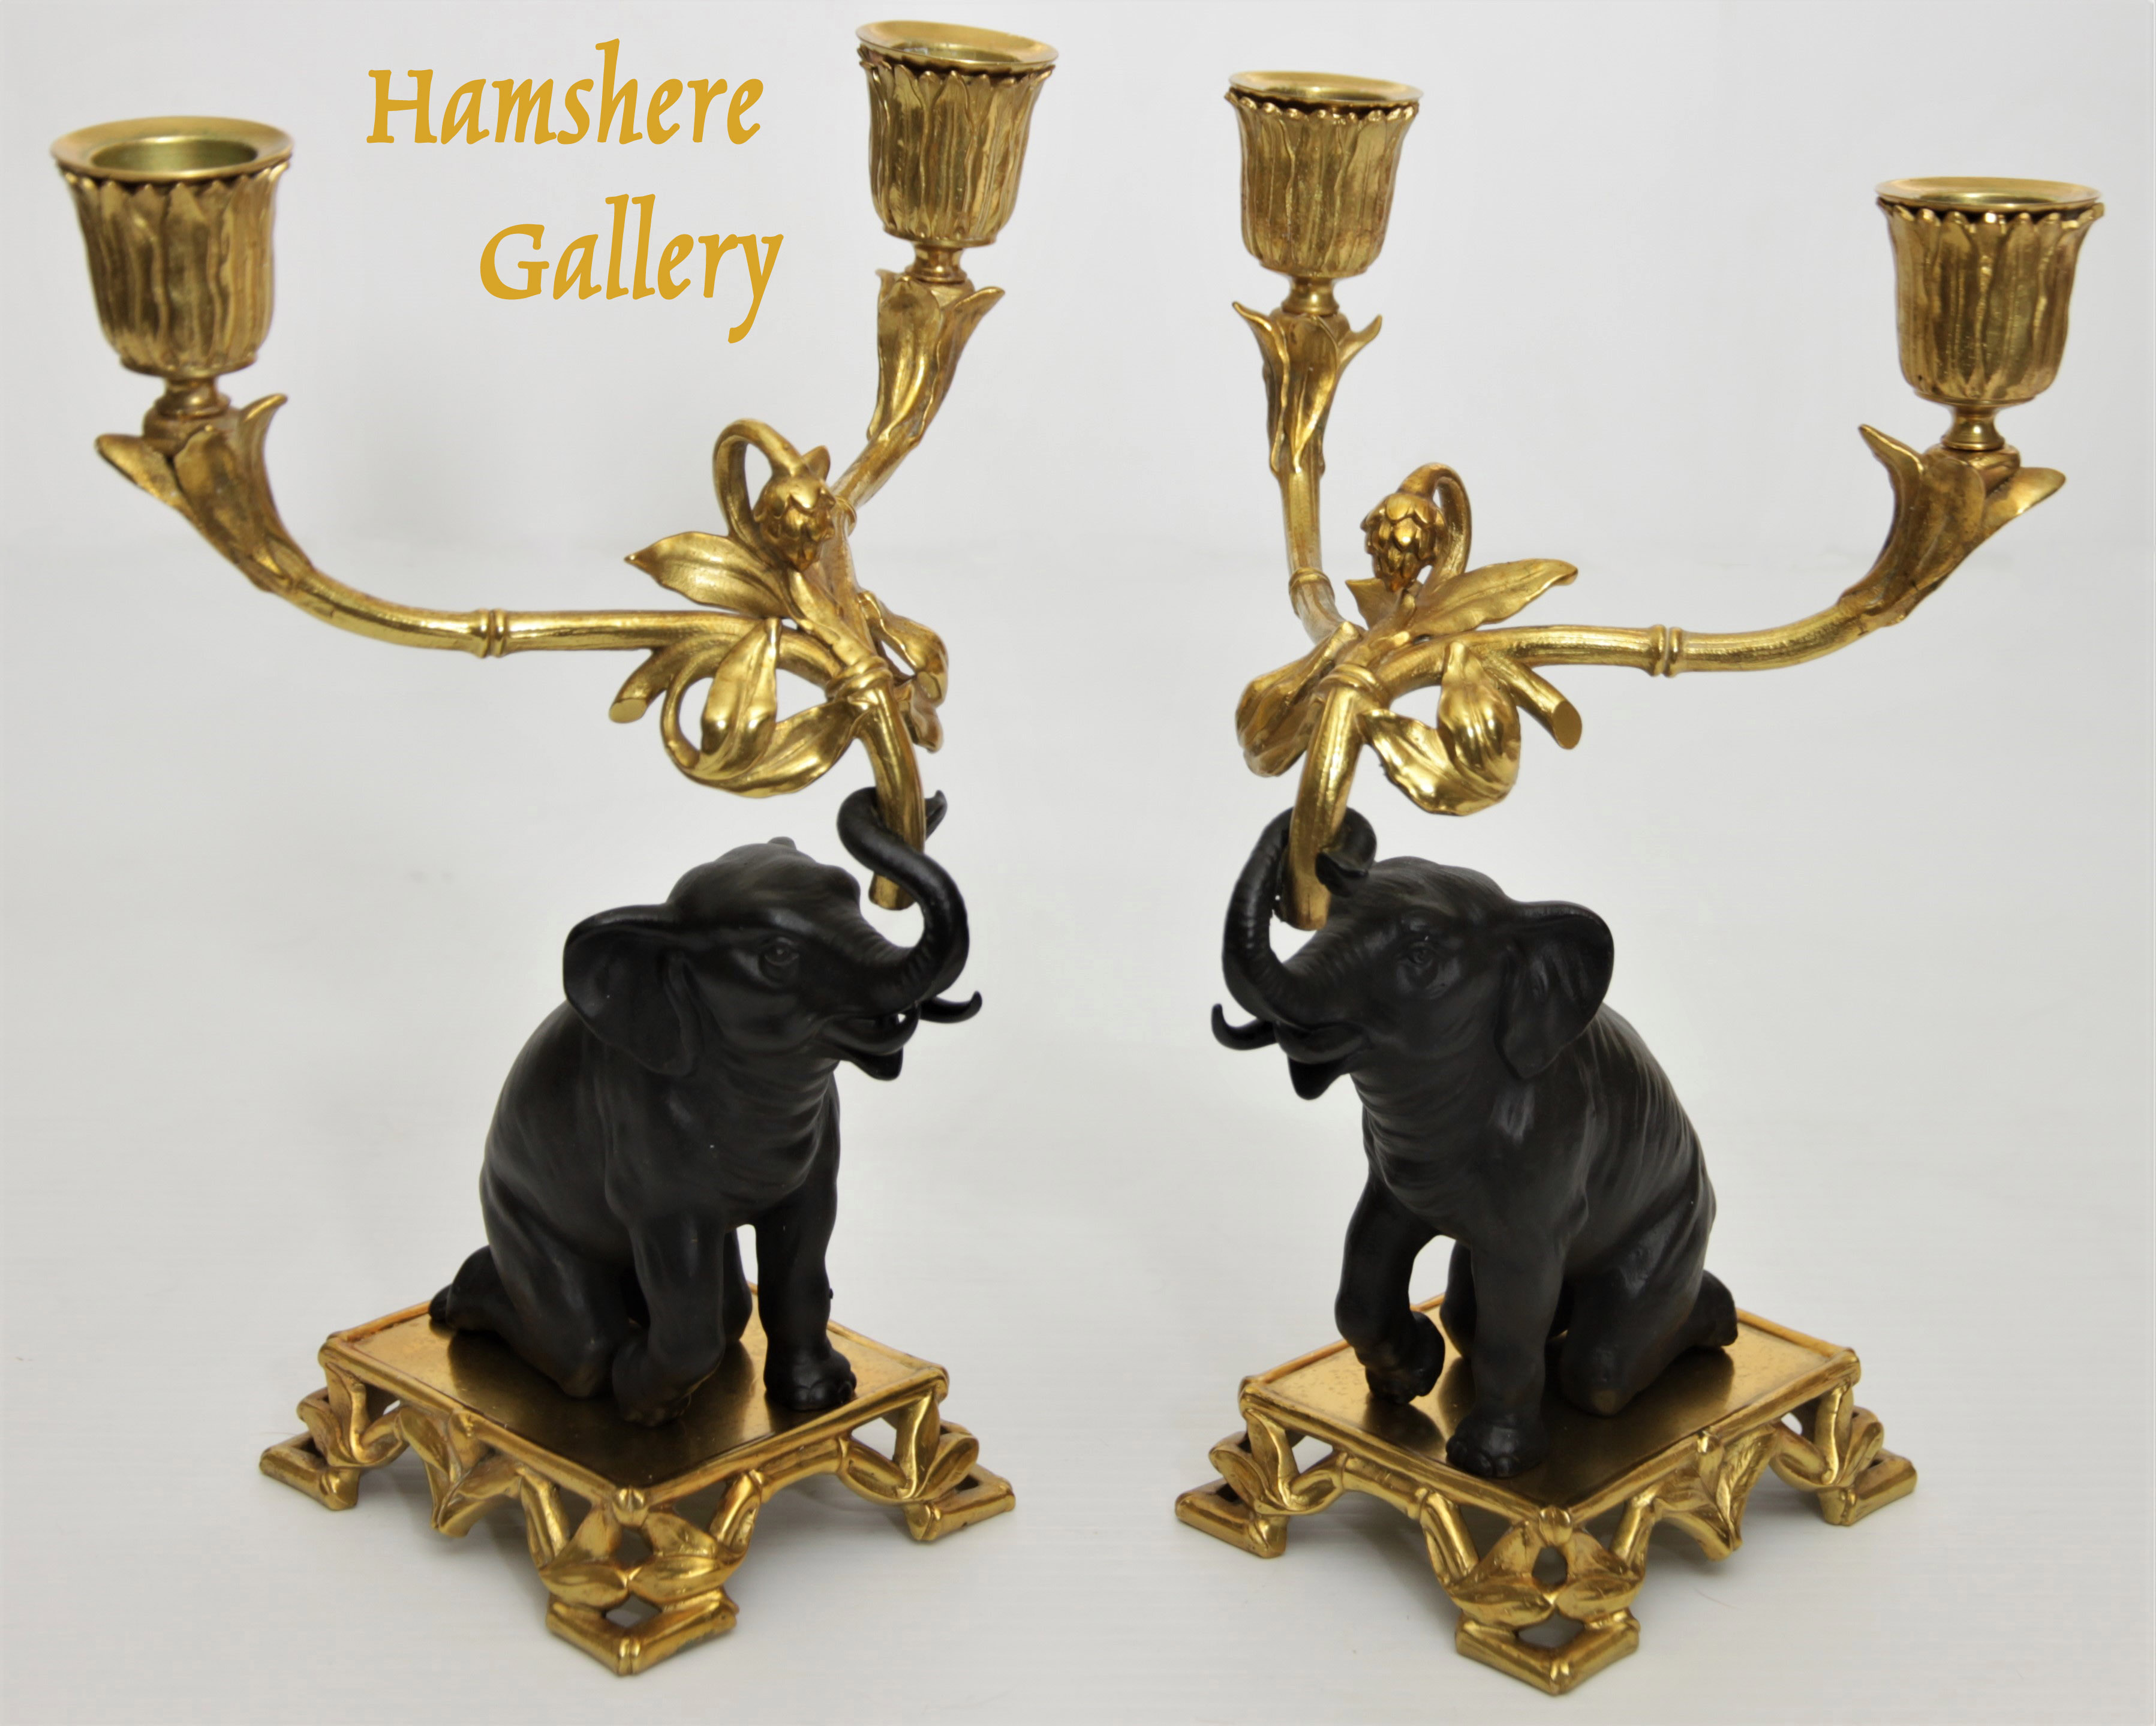 Click for larger image: Late 19th, French bronze and ormolu pair of elephant candelabra / candlesticks - Late 19th, French bronze and ormolu pair of elephant candelabra / candlesticks